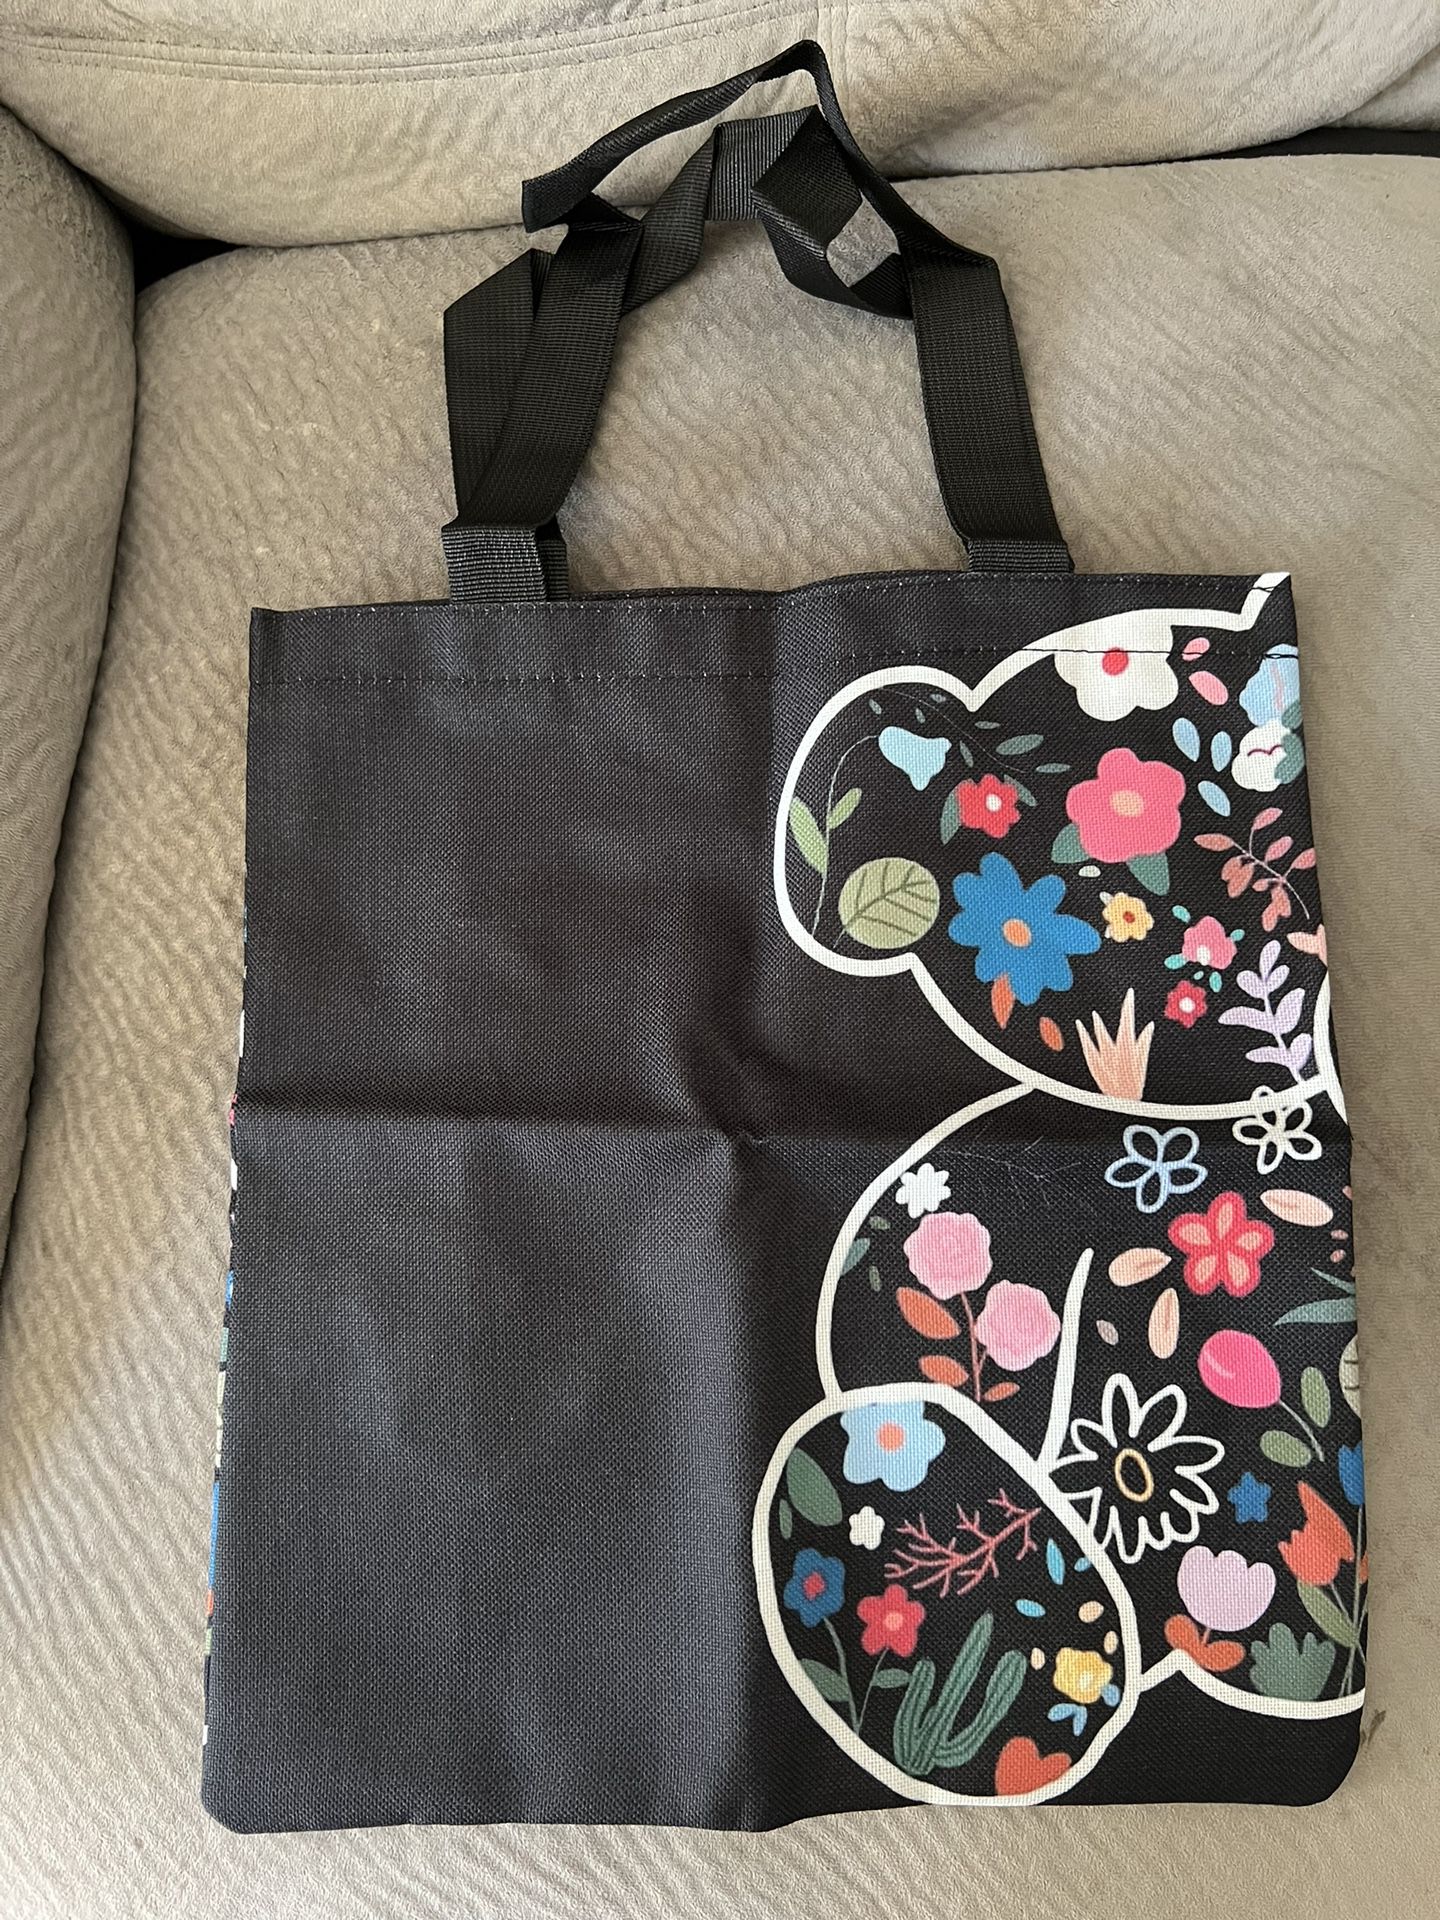 Brand New Teddy Bear Tote Bag - PICKUP IN AIEA - I DON’T DELIVER 